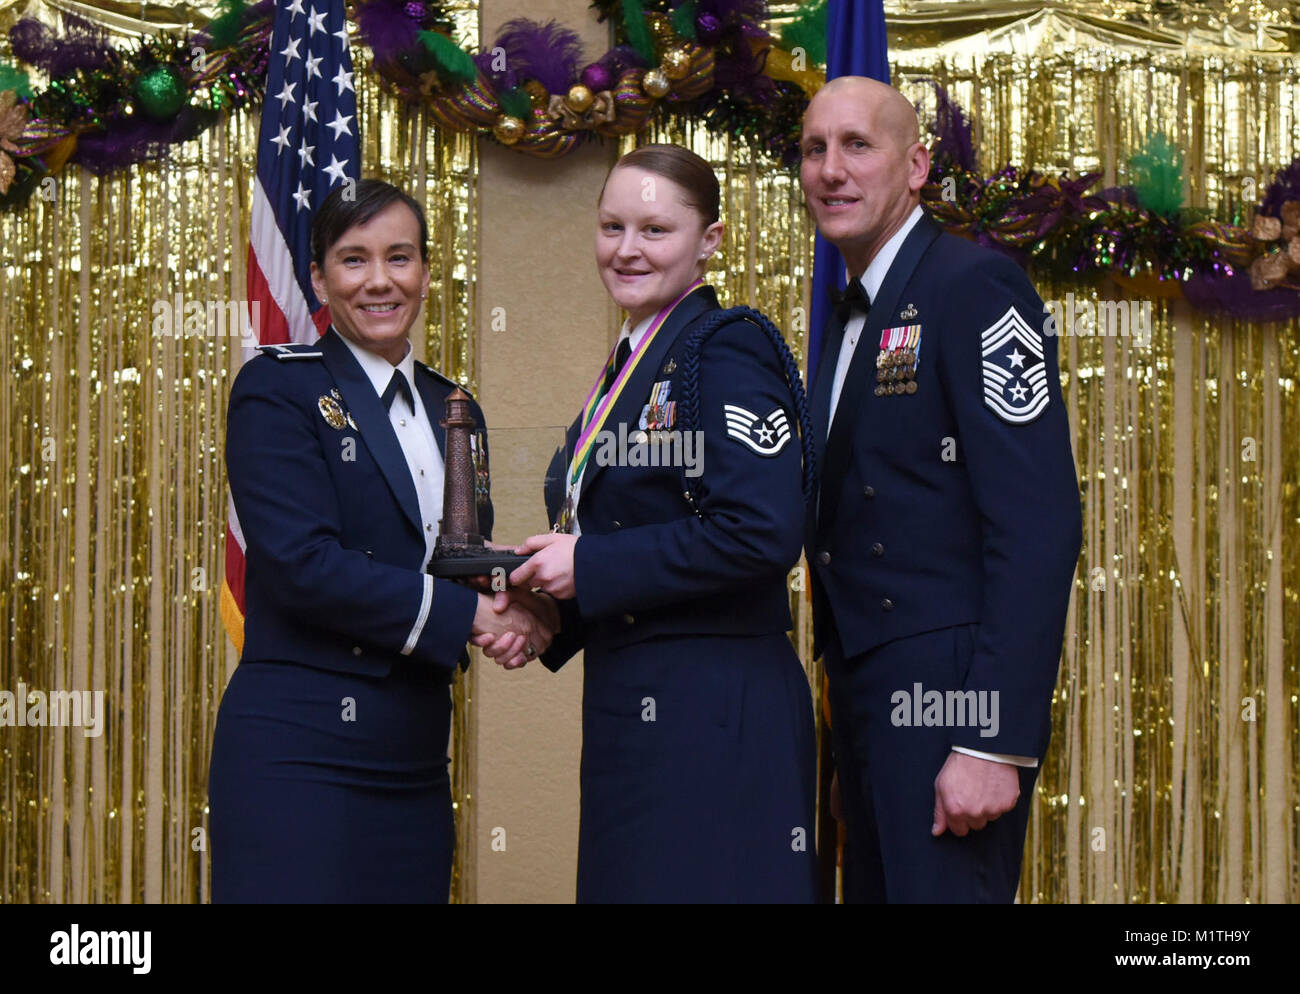 Col. Debra Lovette, 81st Training Wing commander, and Chief Master Sgt. Kenneth Carter, 81st TRW command chief, present Staff Sgt. Lauren Harris, 338th Training Squadron military training leader, with the Junior NCO Military Training Leader of the Year Annual Award during the 2017 Keesler Annual Awards Ceremony at the Bay Breeze Event Center Jan. 25, 2018, on Keesler Air Force Base, Mississippi. During the ceremony base leadership recognized outstanding Airmen and civilians from across the installation for their accomplishments throughout 2017. (U.S. Air Force Stock Photo